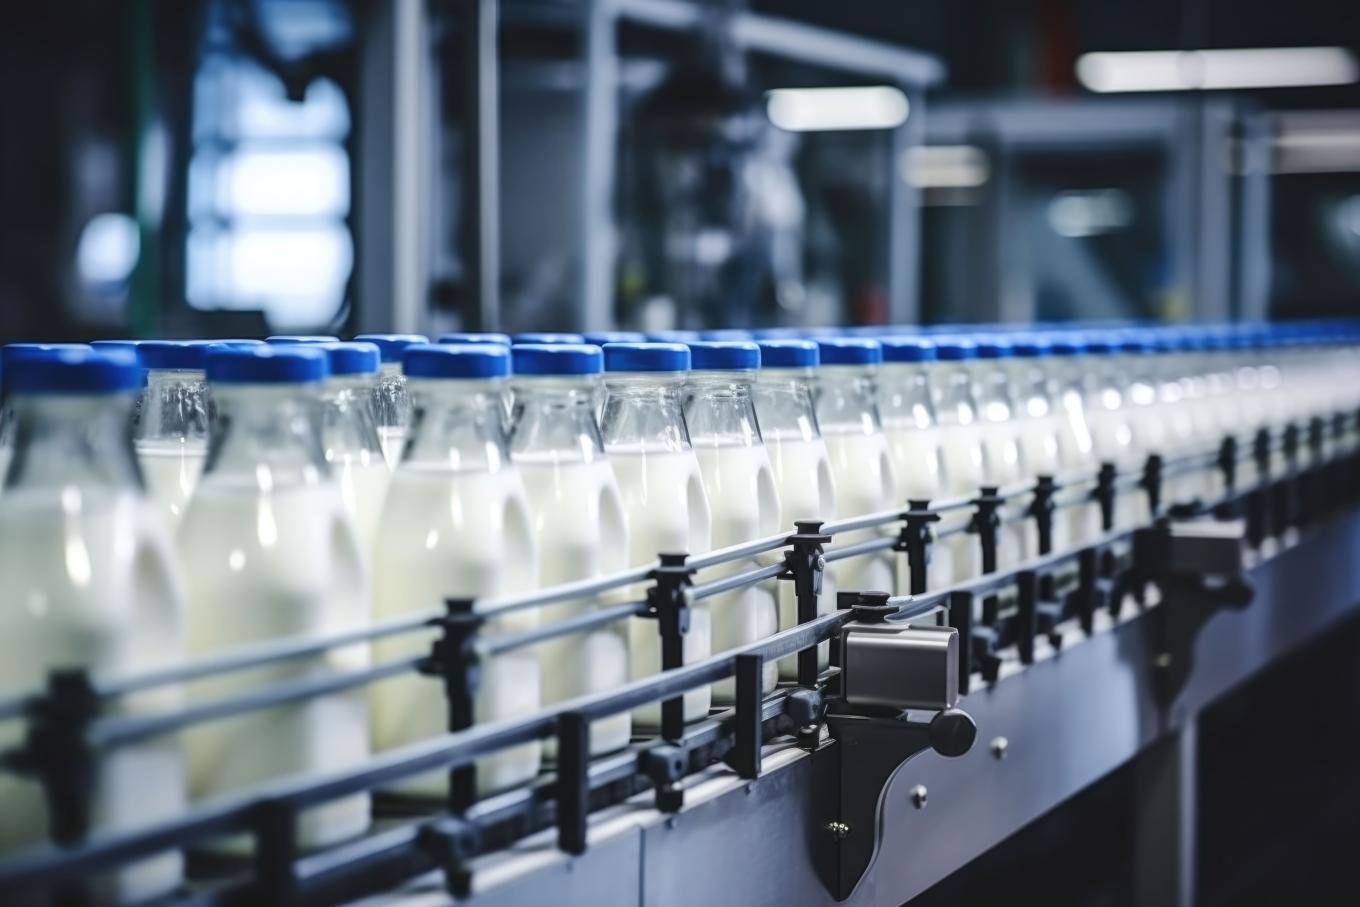 Production line of dairy products with bottles on a conveyor